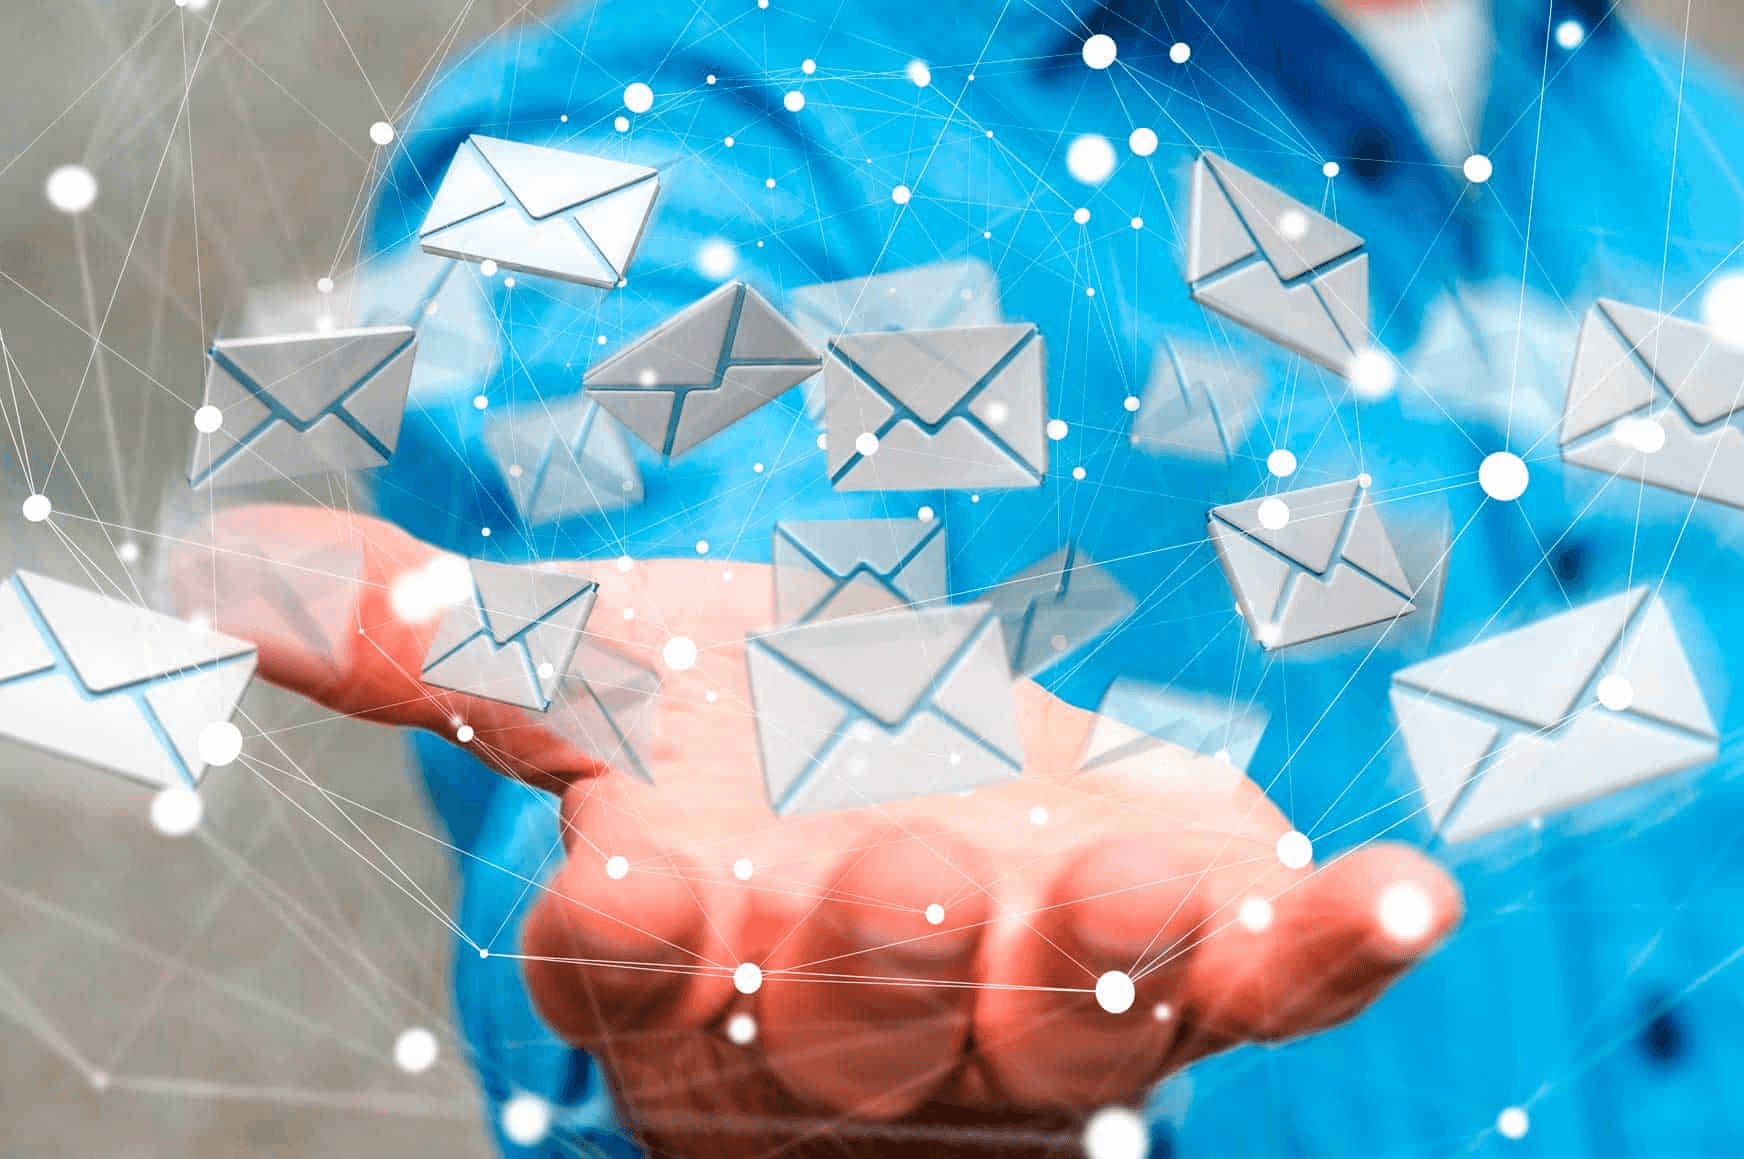 Ninjamail-header: abstract image with emails and hand holding them